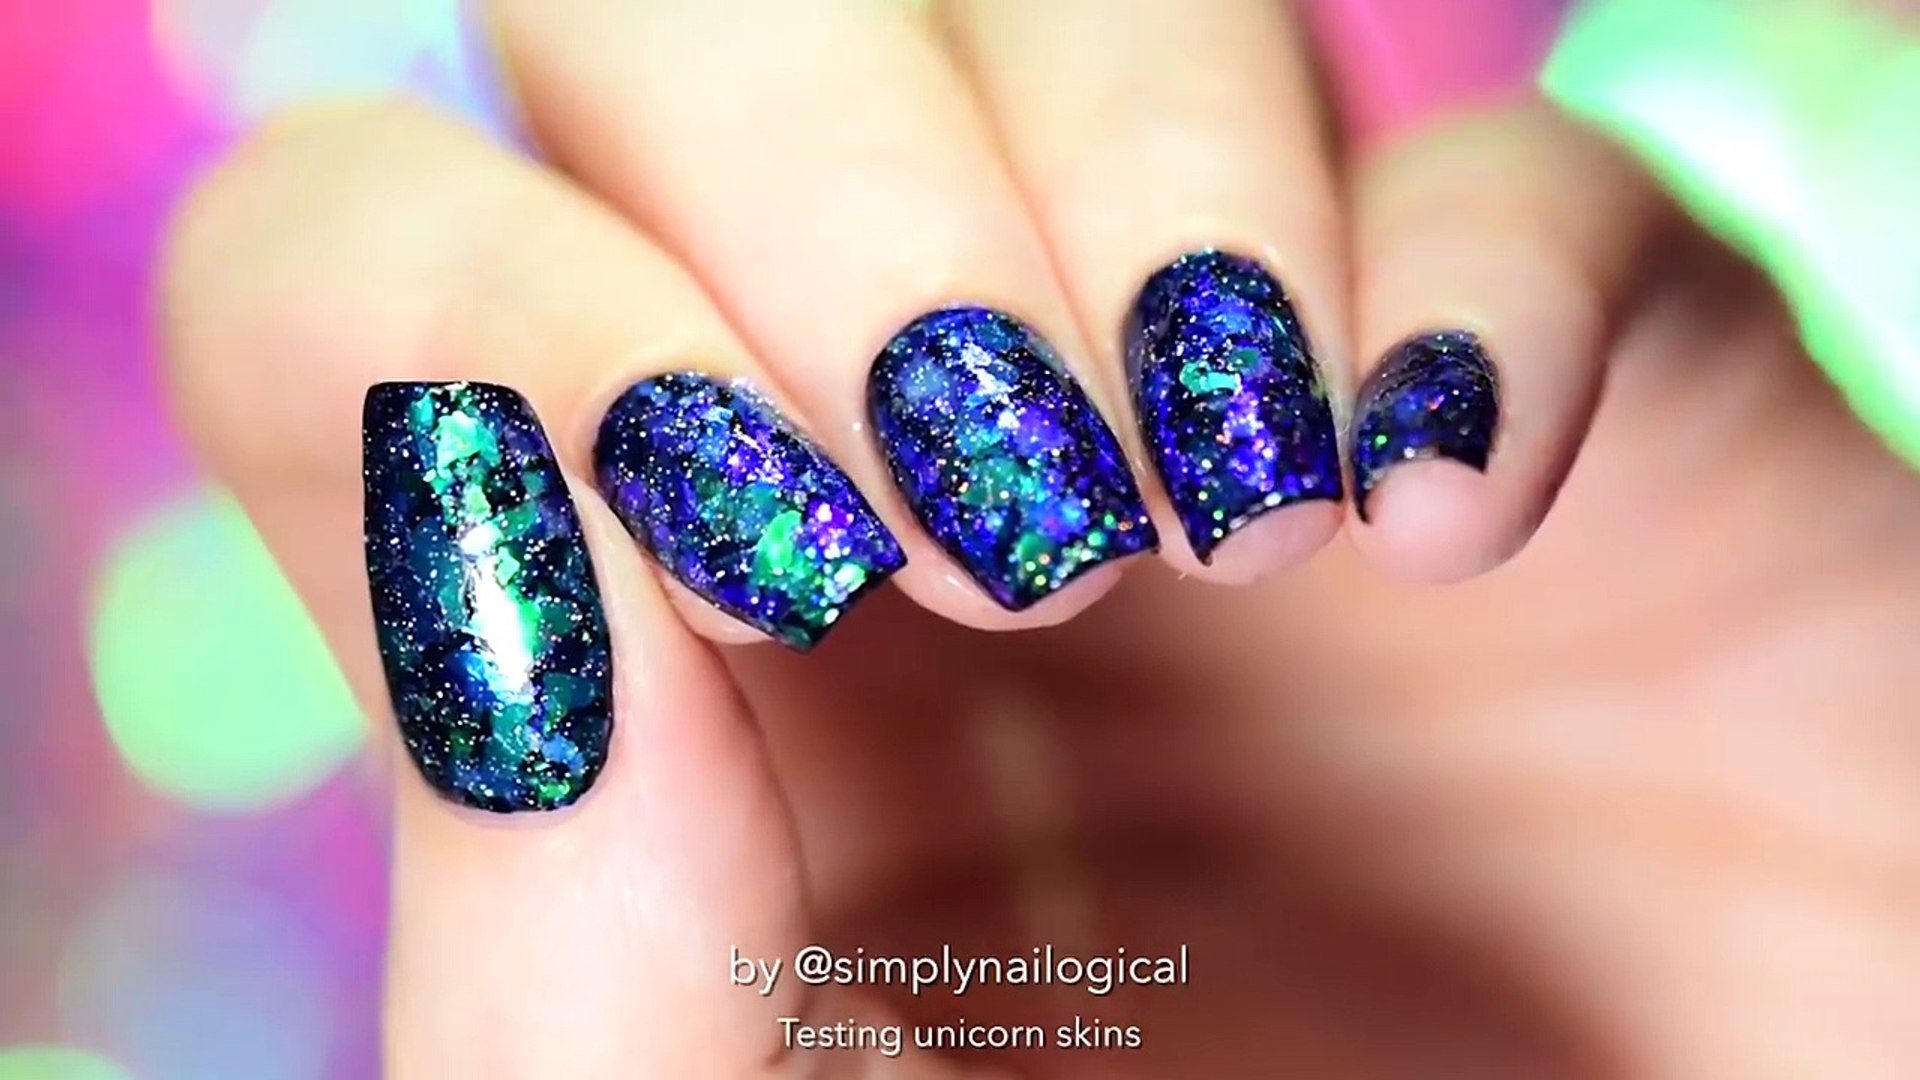 sne energi bunke I Tried Following A Simply Nailogical Nail Art Tutorial - video Dailymotion